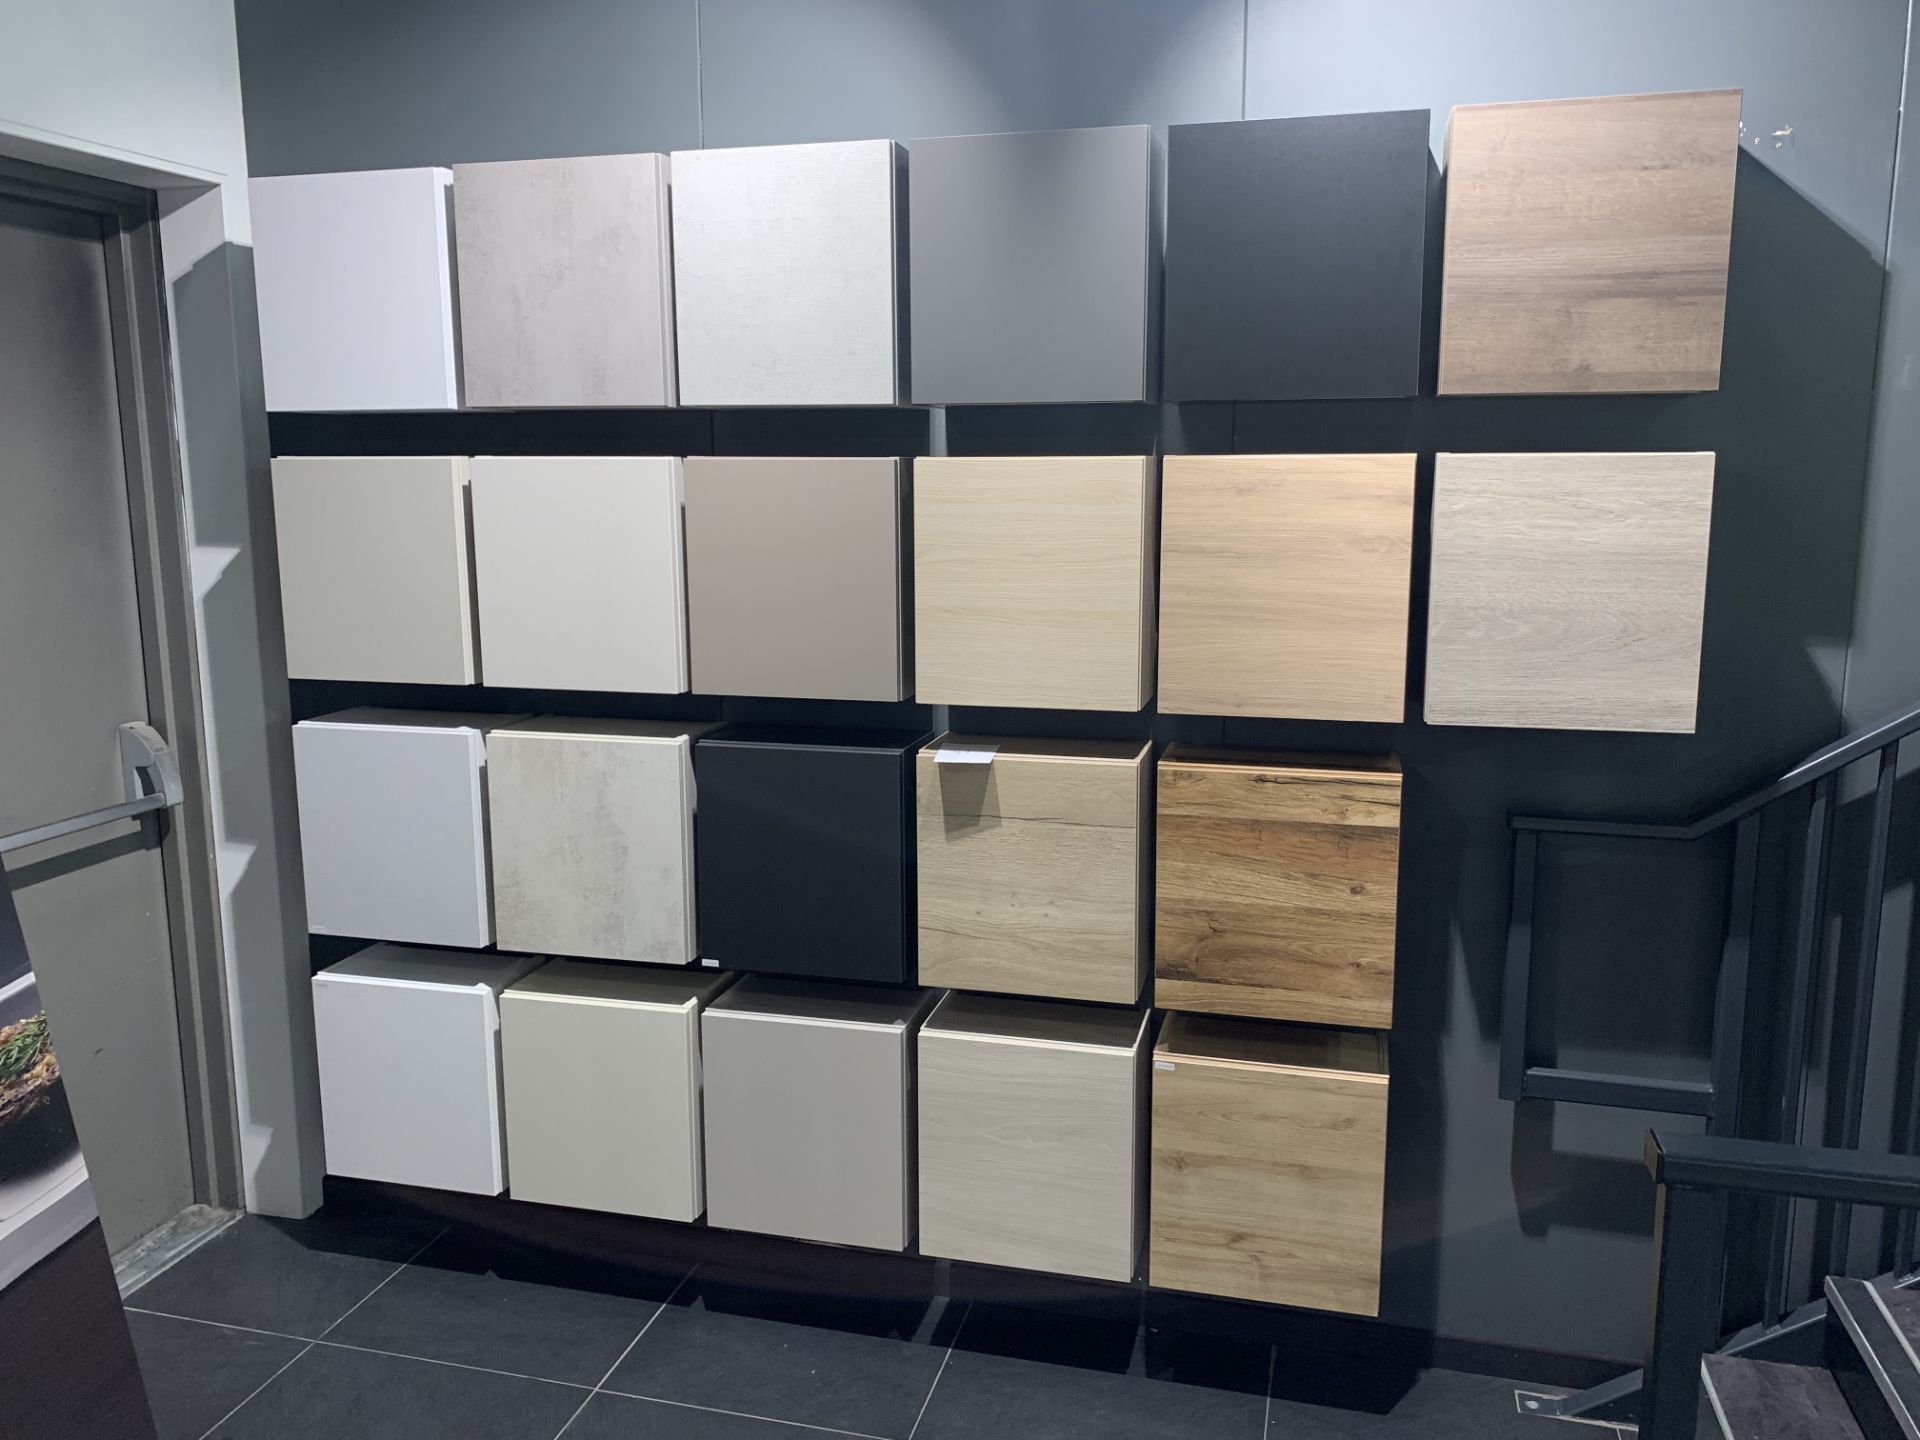 22 x Square Individual Cupboards of assorted finishes